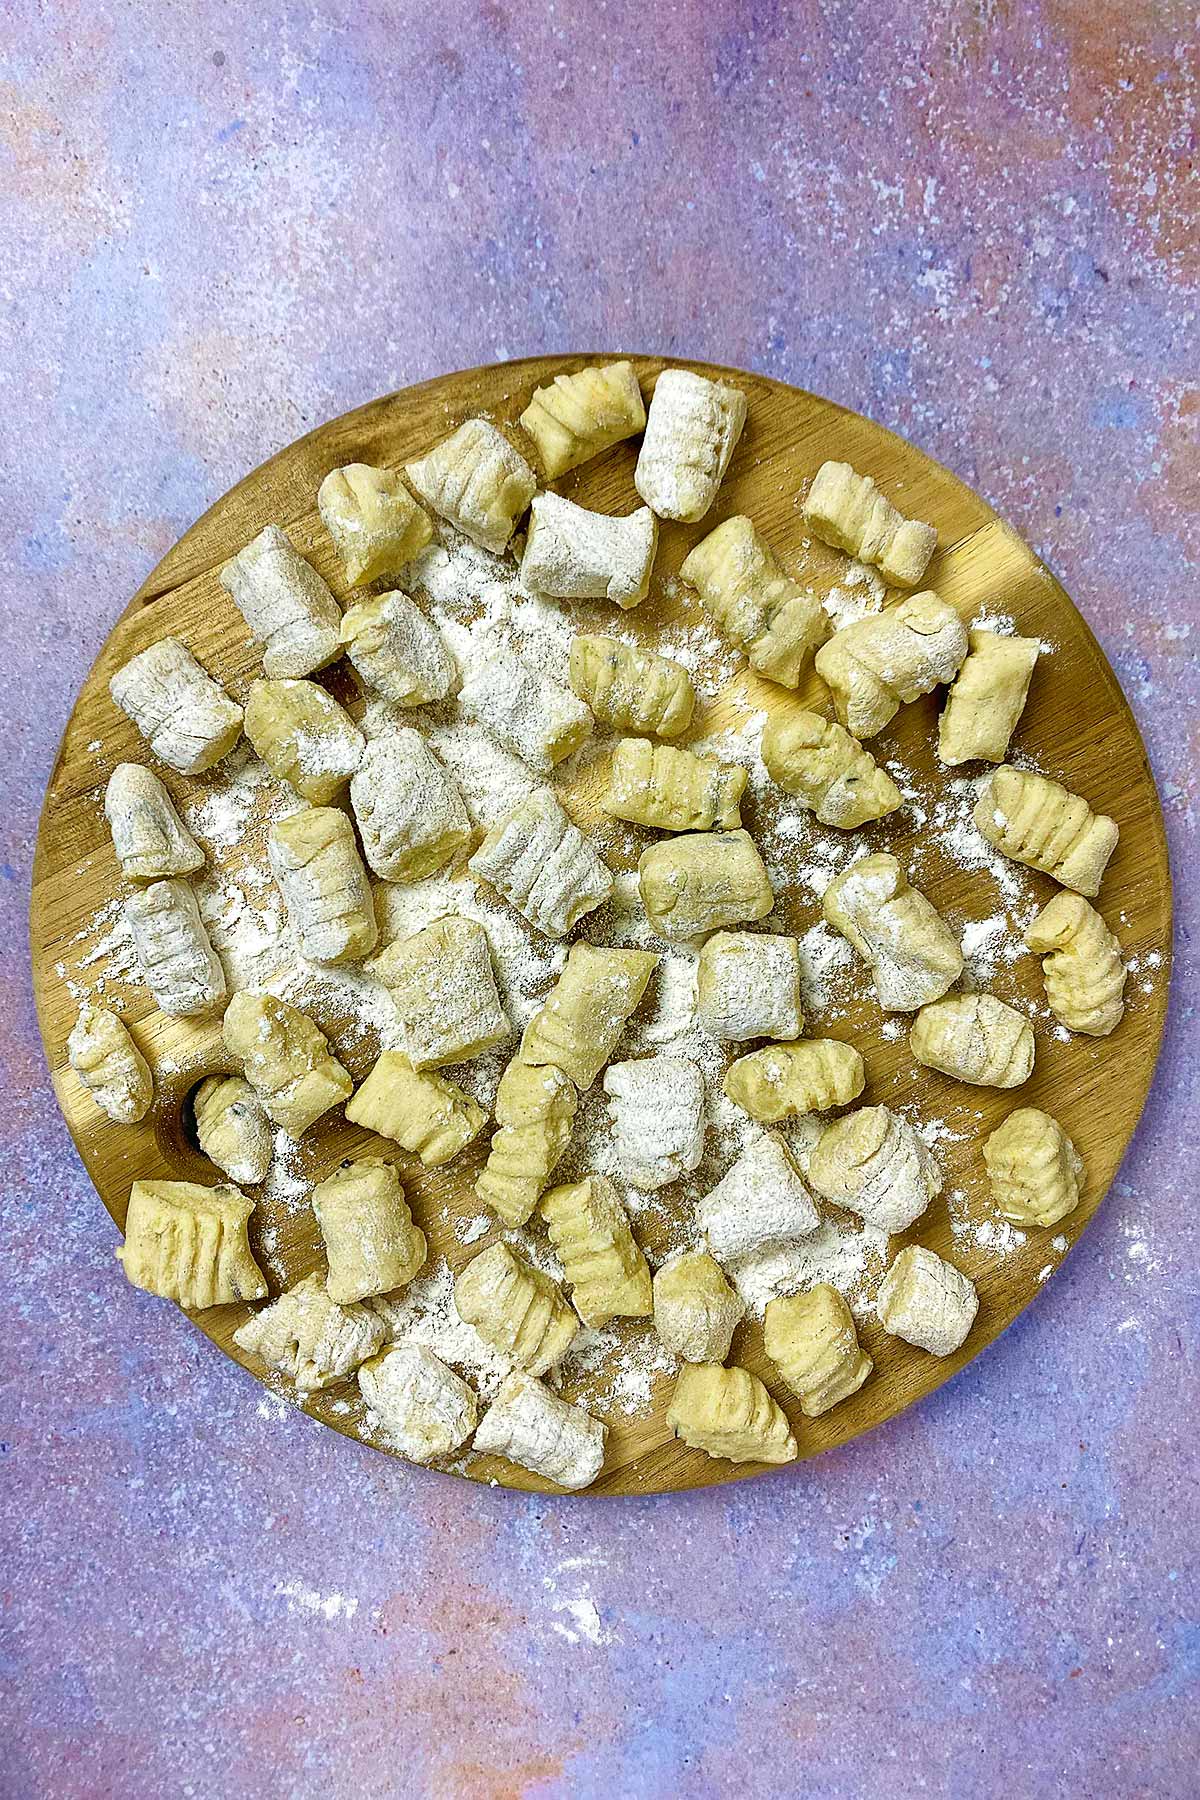 A round wooden serving board covered in uncooked gnocchi.